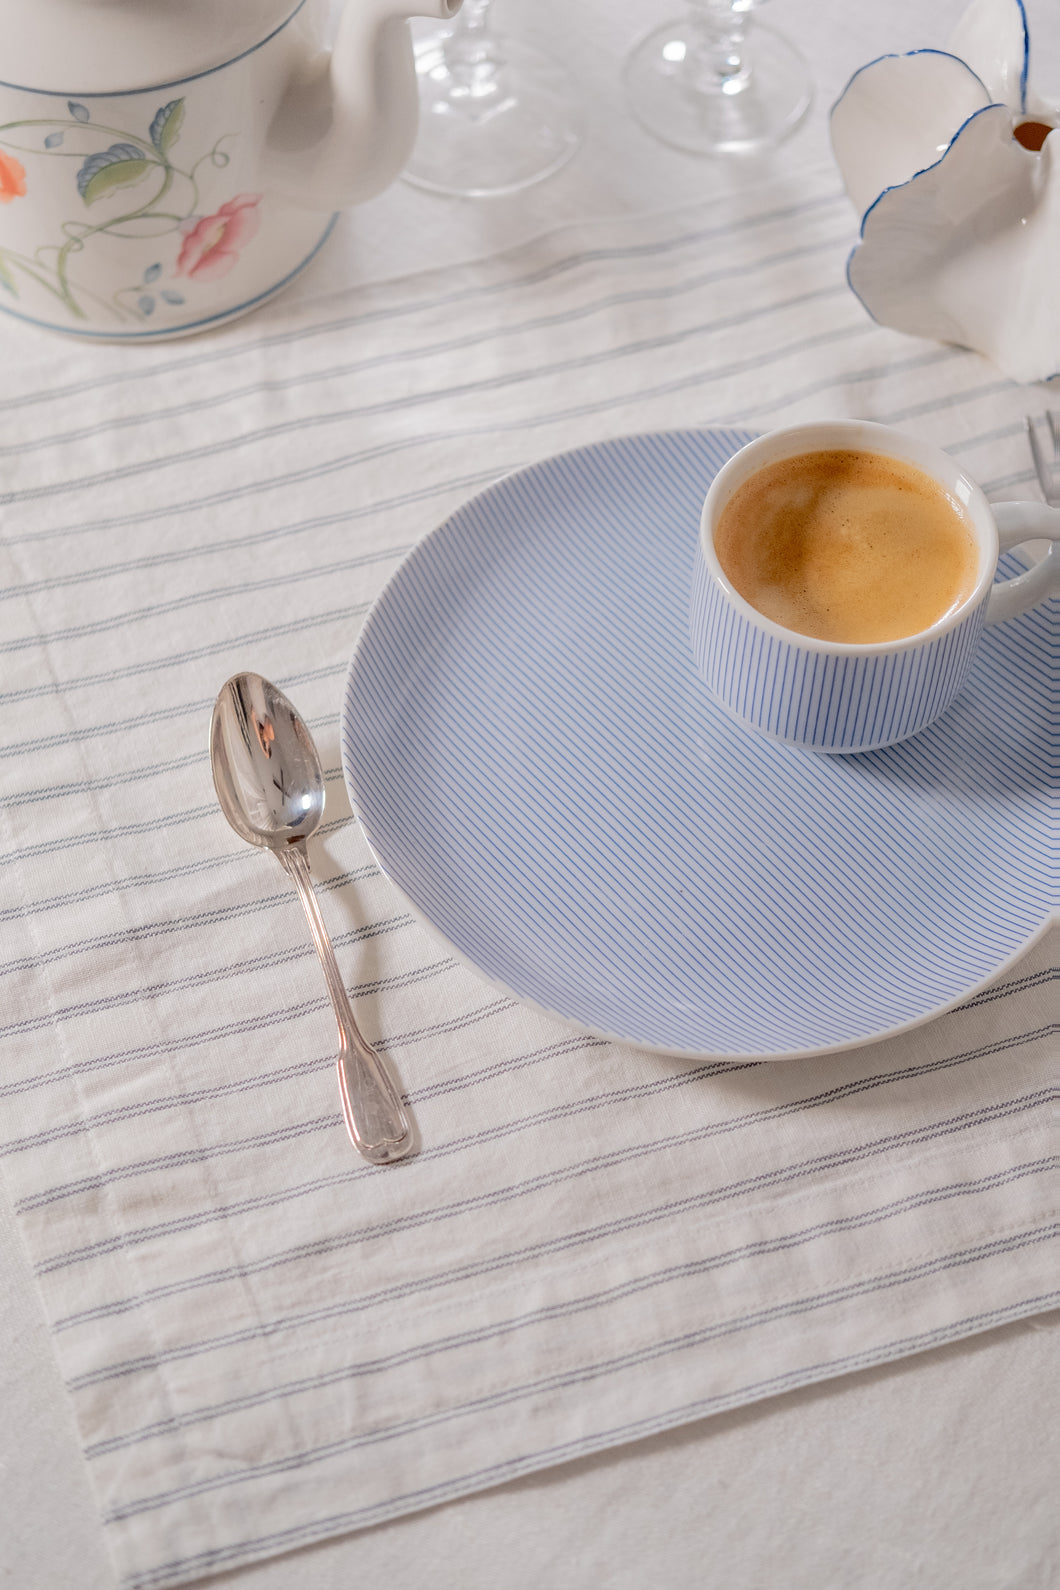 100% Linen Placemats in Ticking Stripe